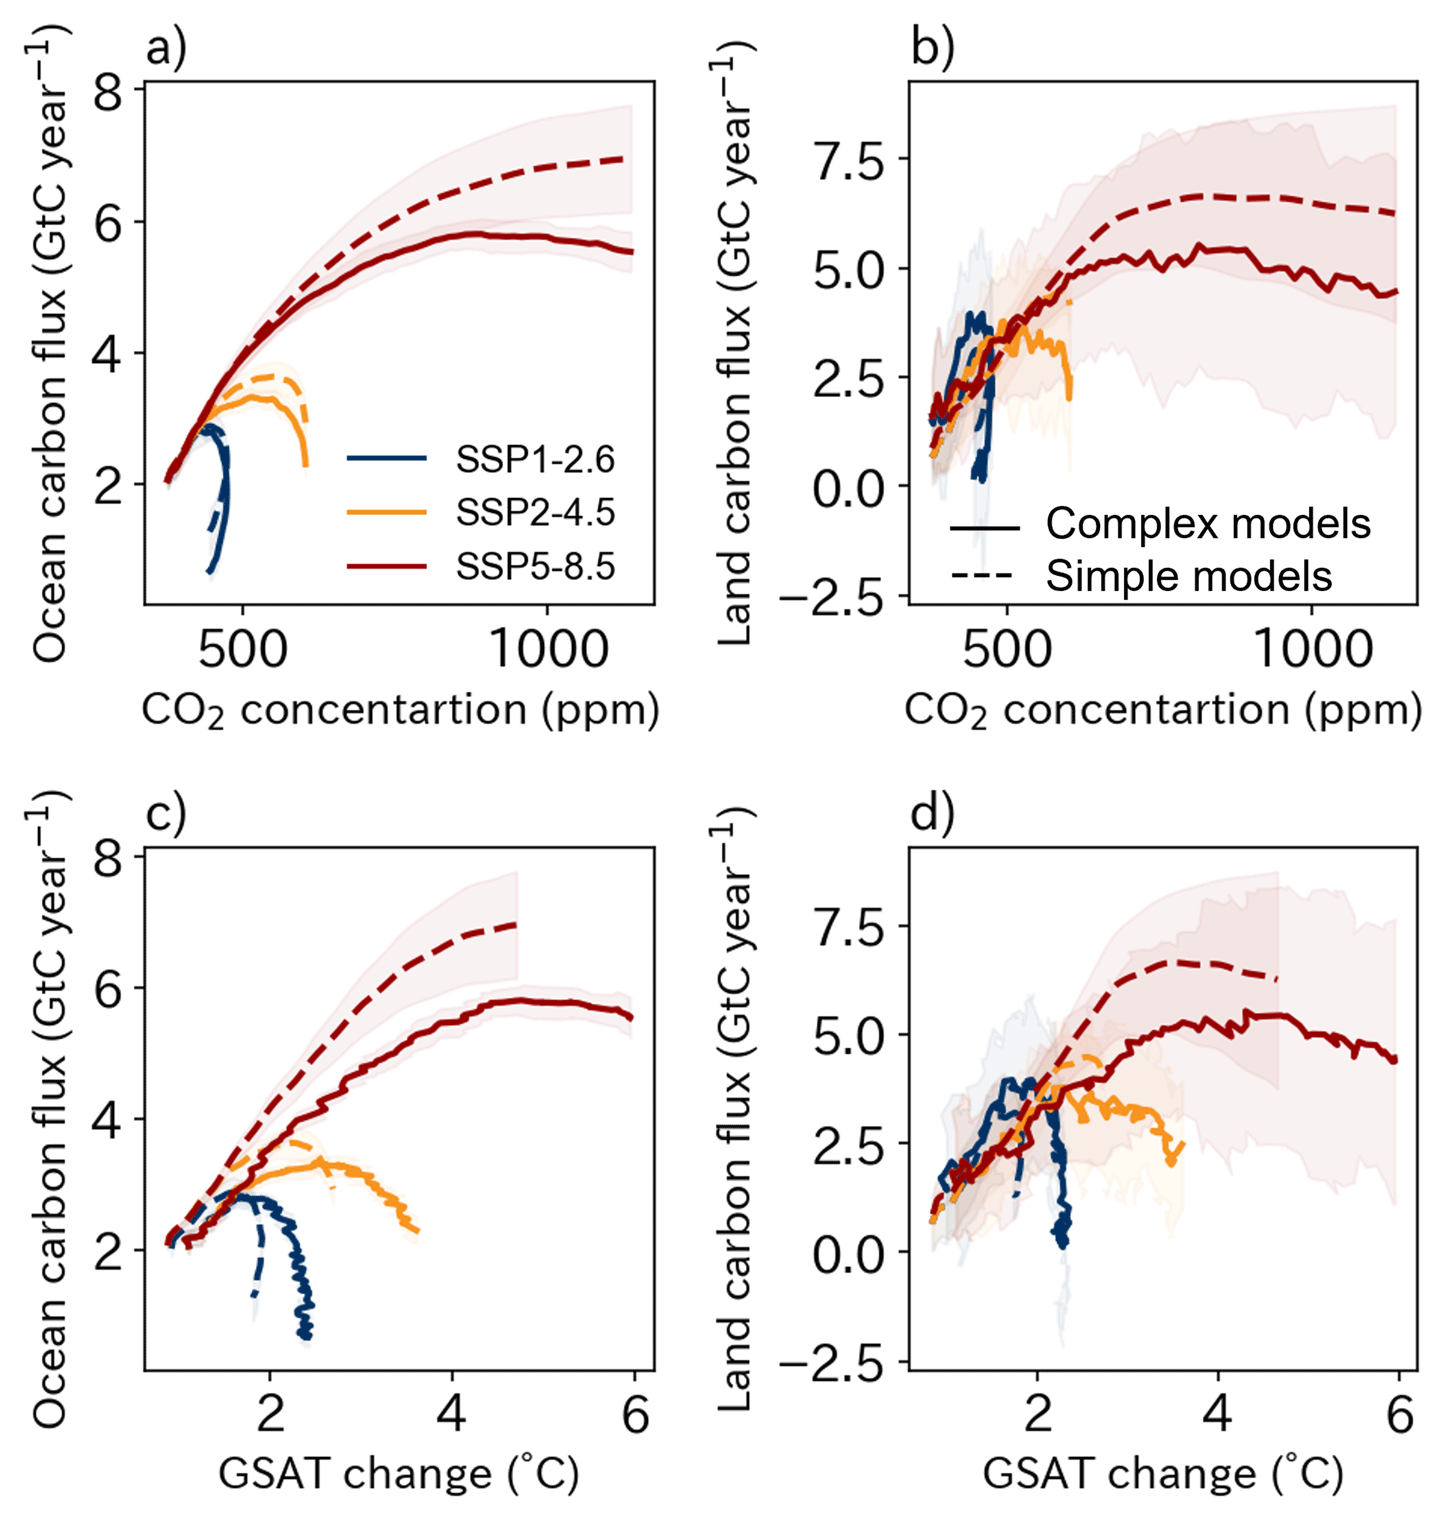 Figure 2. Changes in global ocean and land carbon fluxes projected by complex and simple models under selected SSPs over 2000–2100 periods plotted against changes in CO2 concentration (ppm) and GSAT change (°C, relative to 1850–1899) under selected SSPs. Shaded areas indicate the inter-model spread for each scenario as one standard deviation.